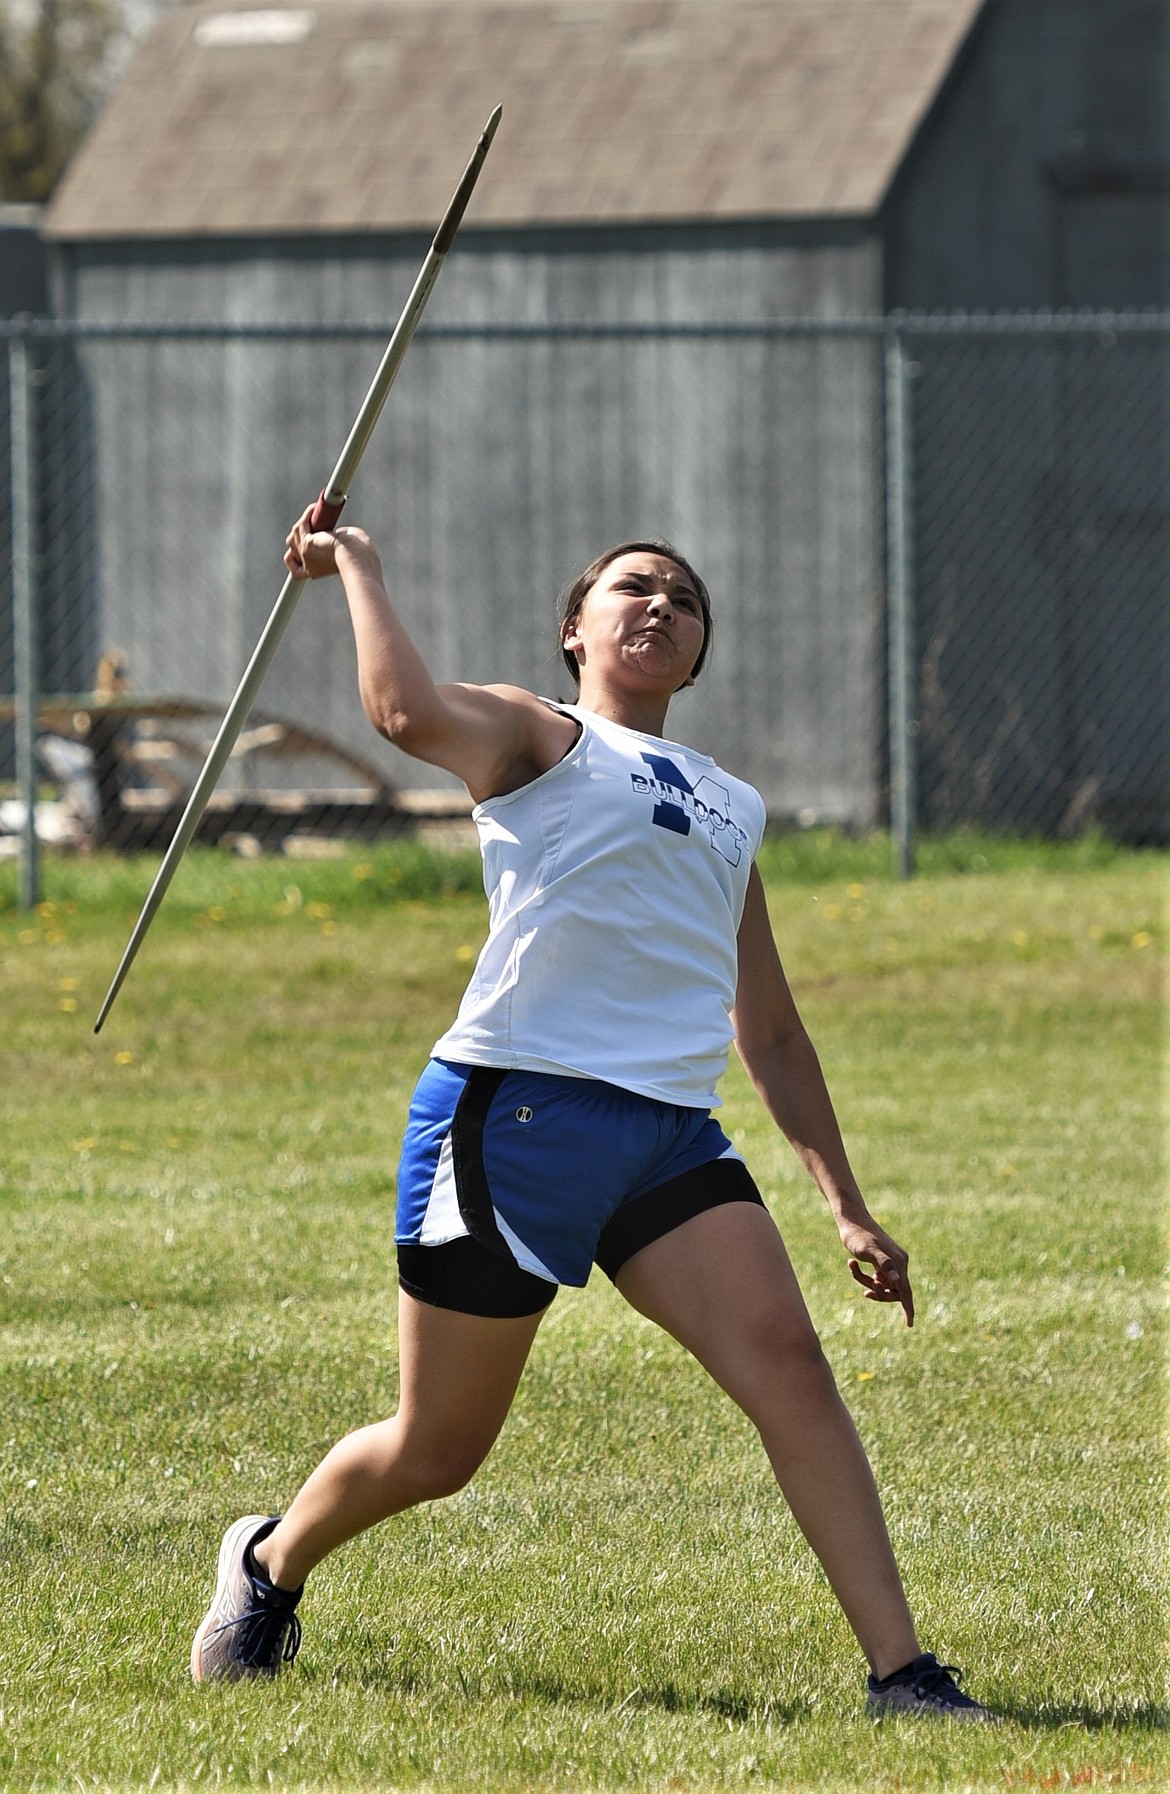 Mission freshman Jordann Singer launches the javelin Thursday during the Lake County meet at Ronan. (Scot Heisel/Lake County Leader)